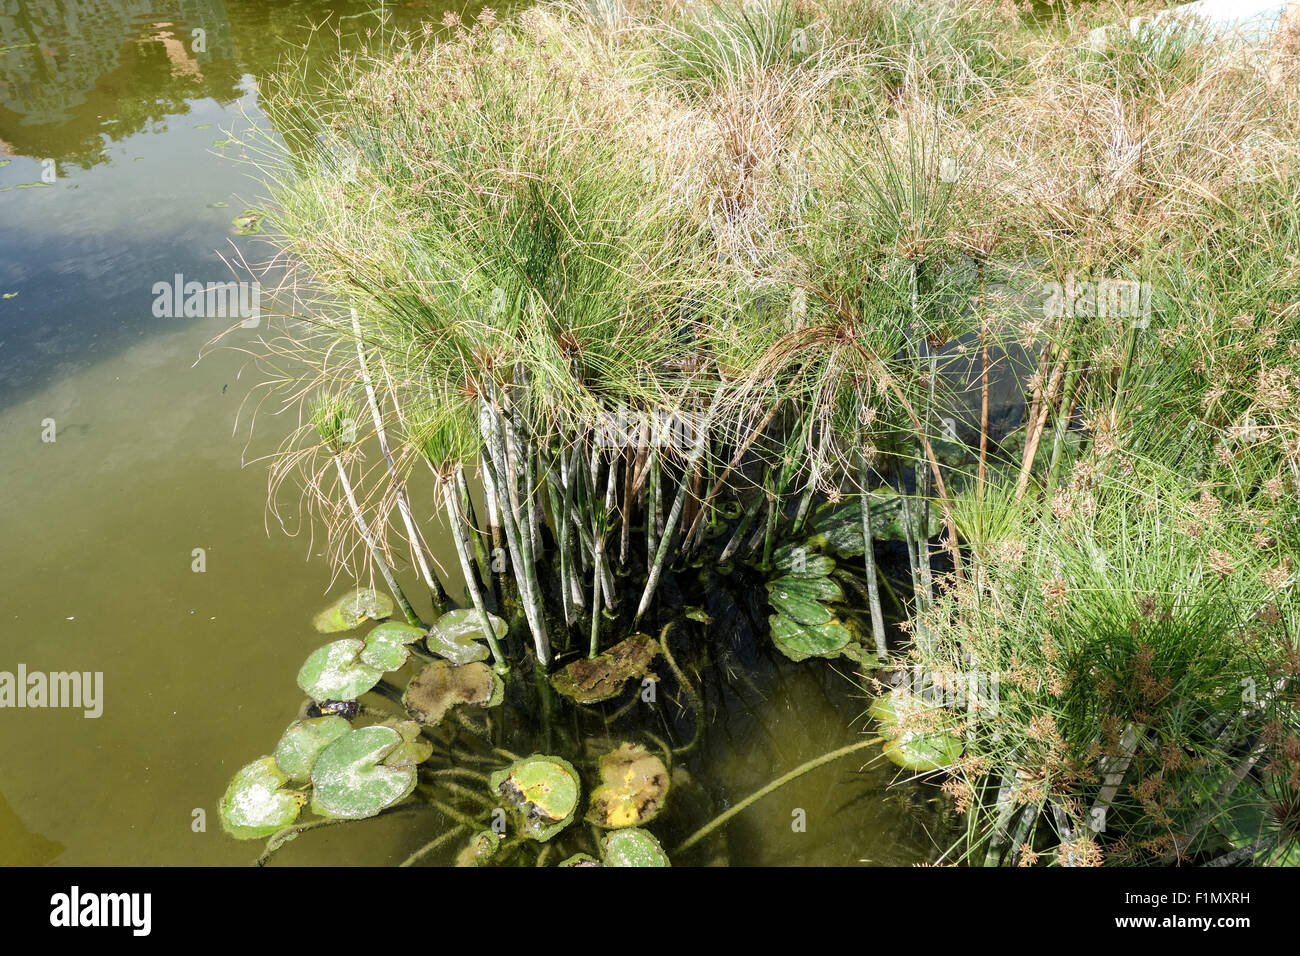 Papyrus sedge, paper reed, Indian matting plant, Nile grass, Cyperus papyrus, in pond in Malaga, Spain. Stock Photo